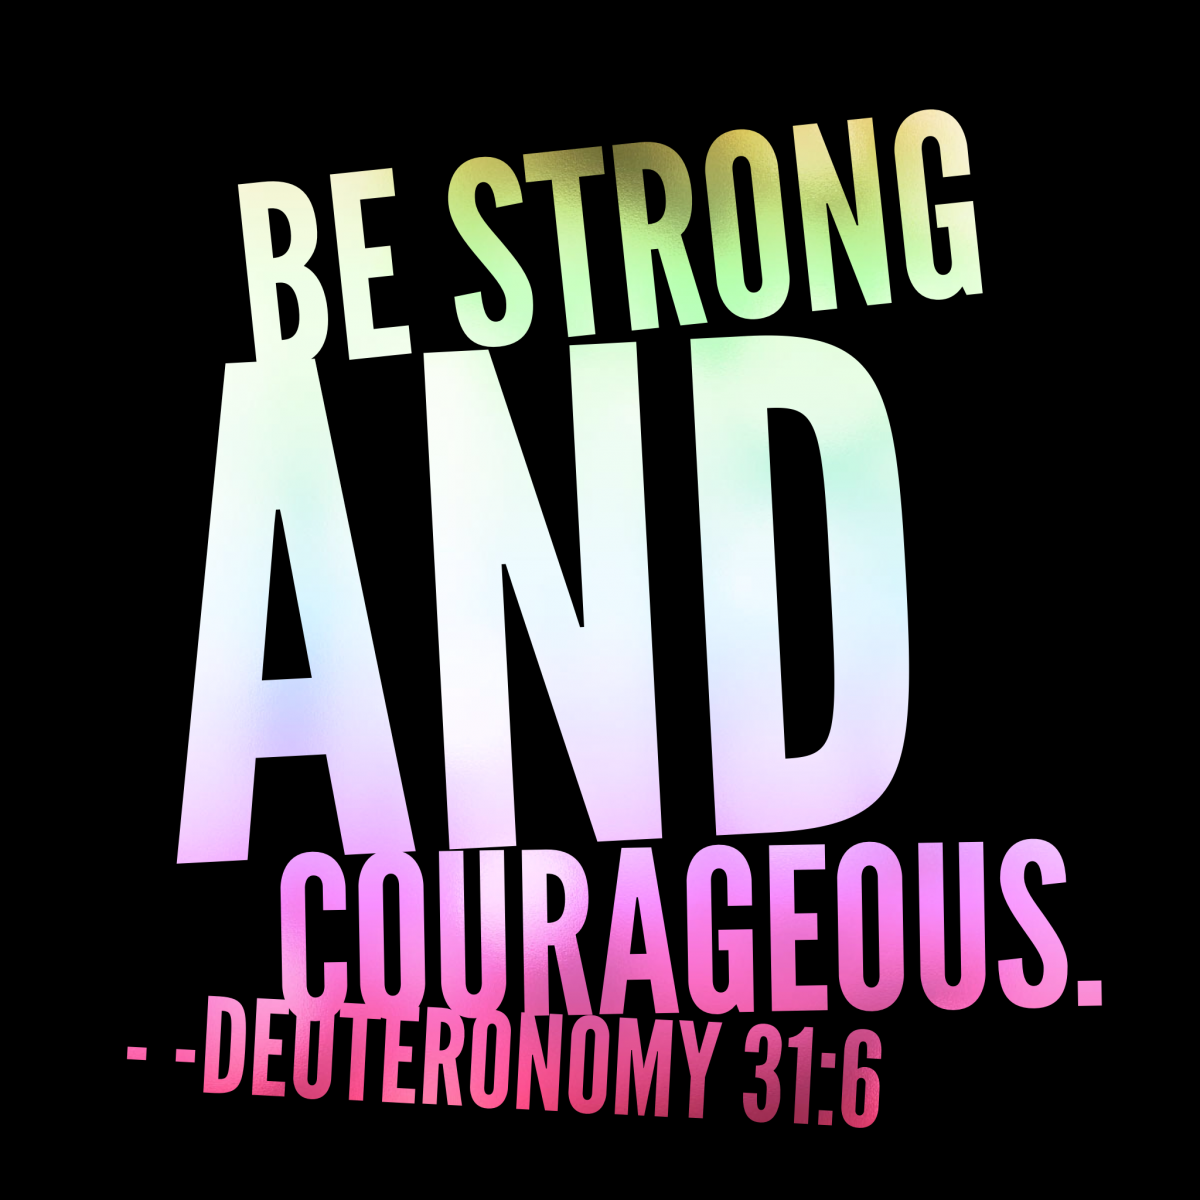 Quote of the Day - be strong and courageous.